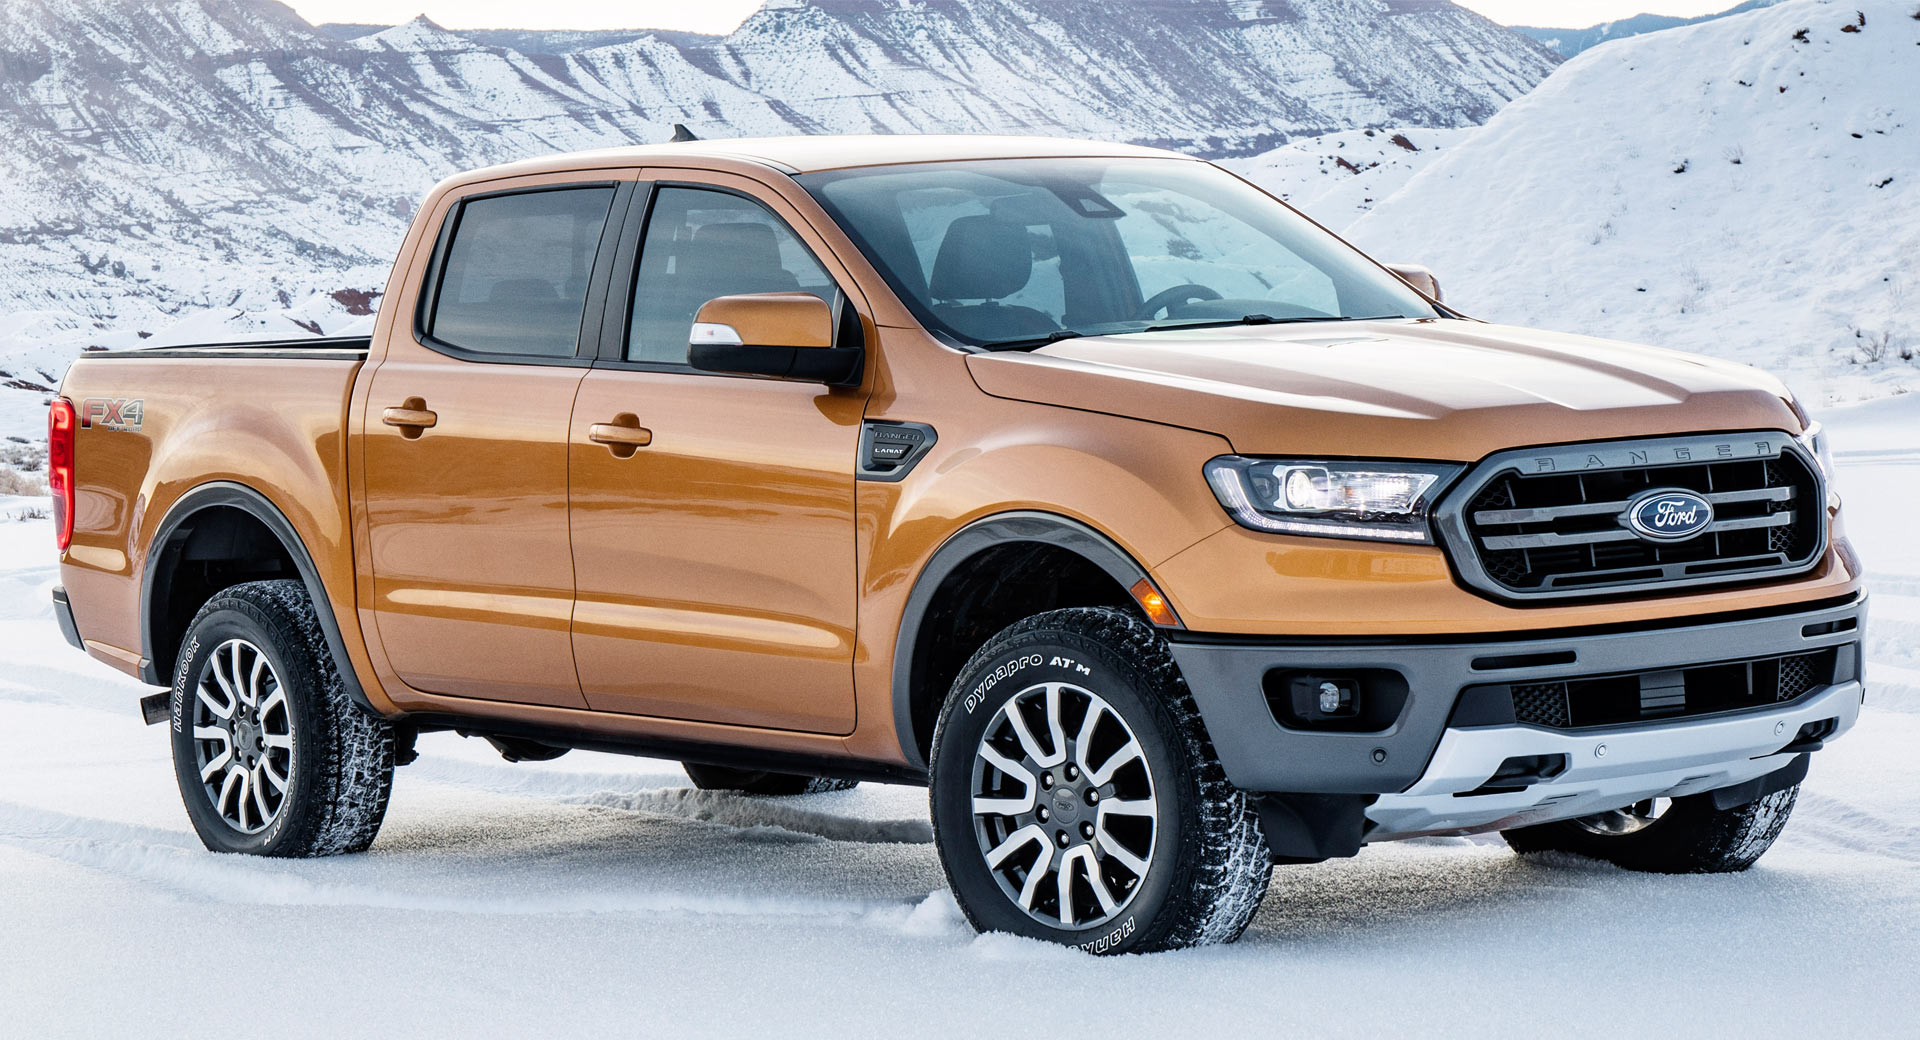 2019 Ford Ranger Is The Most Fuel-Efficient Midsize Truck ...